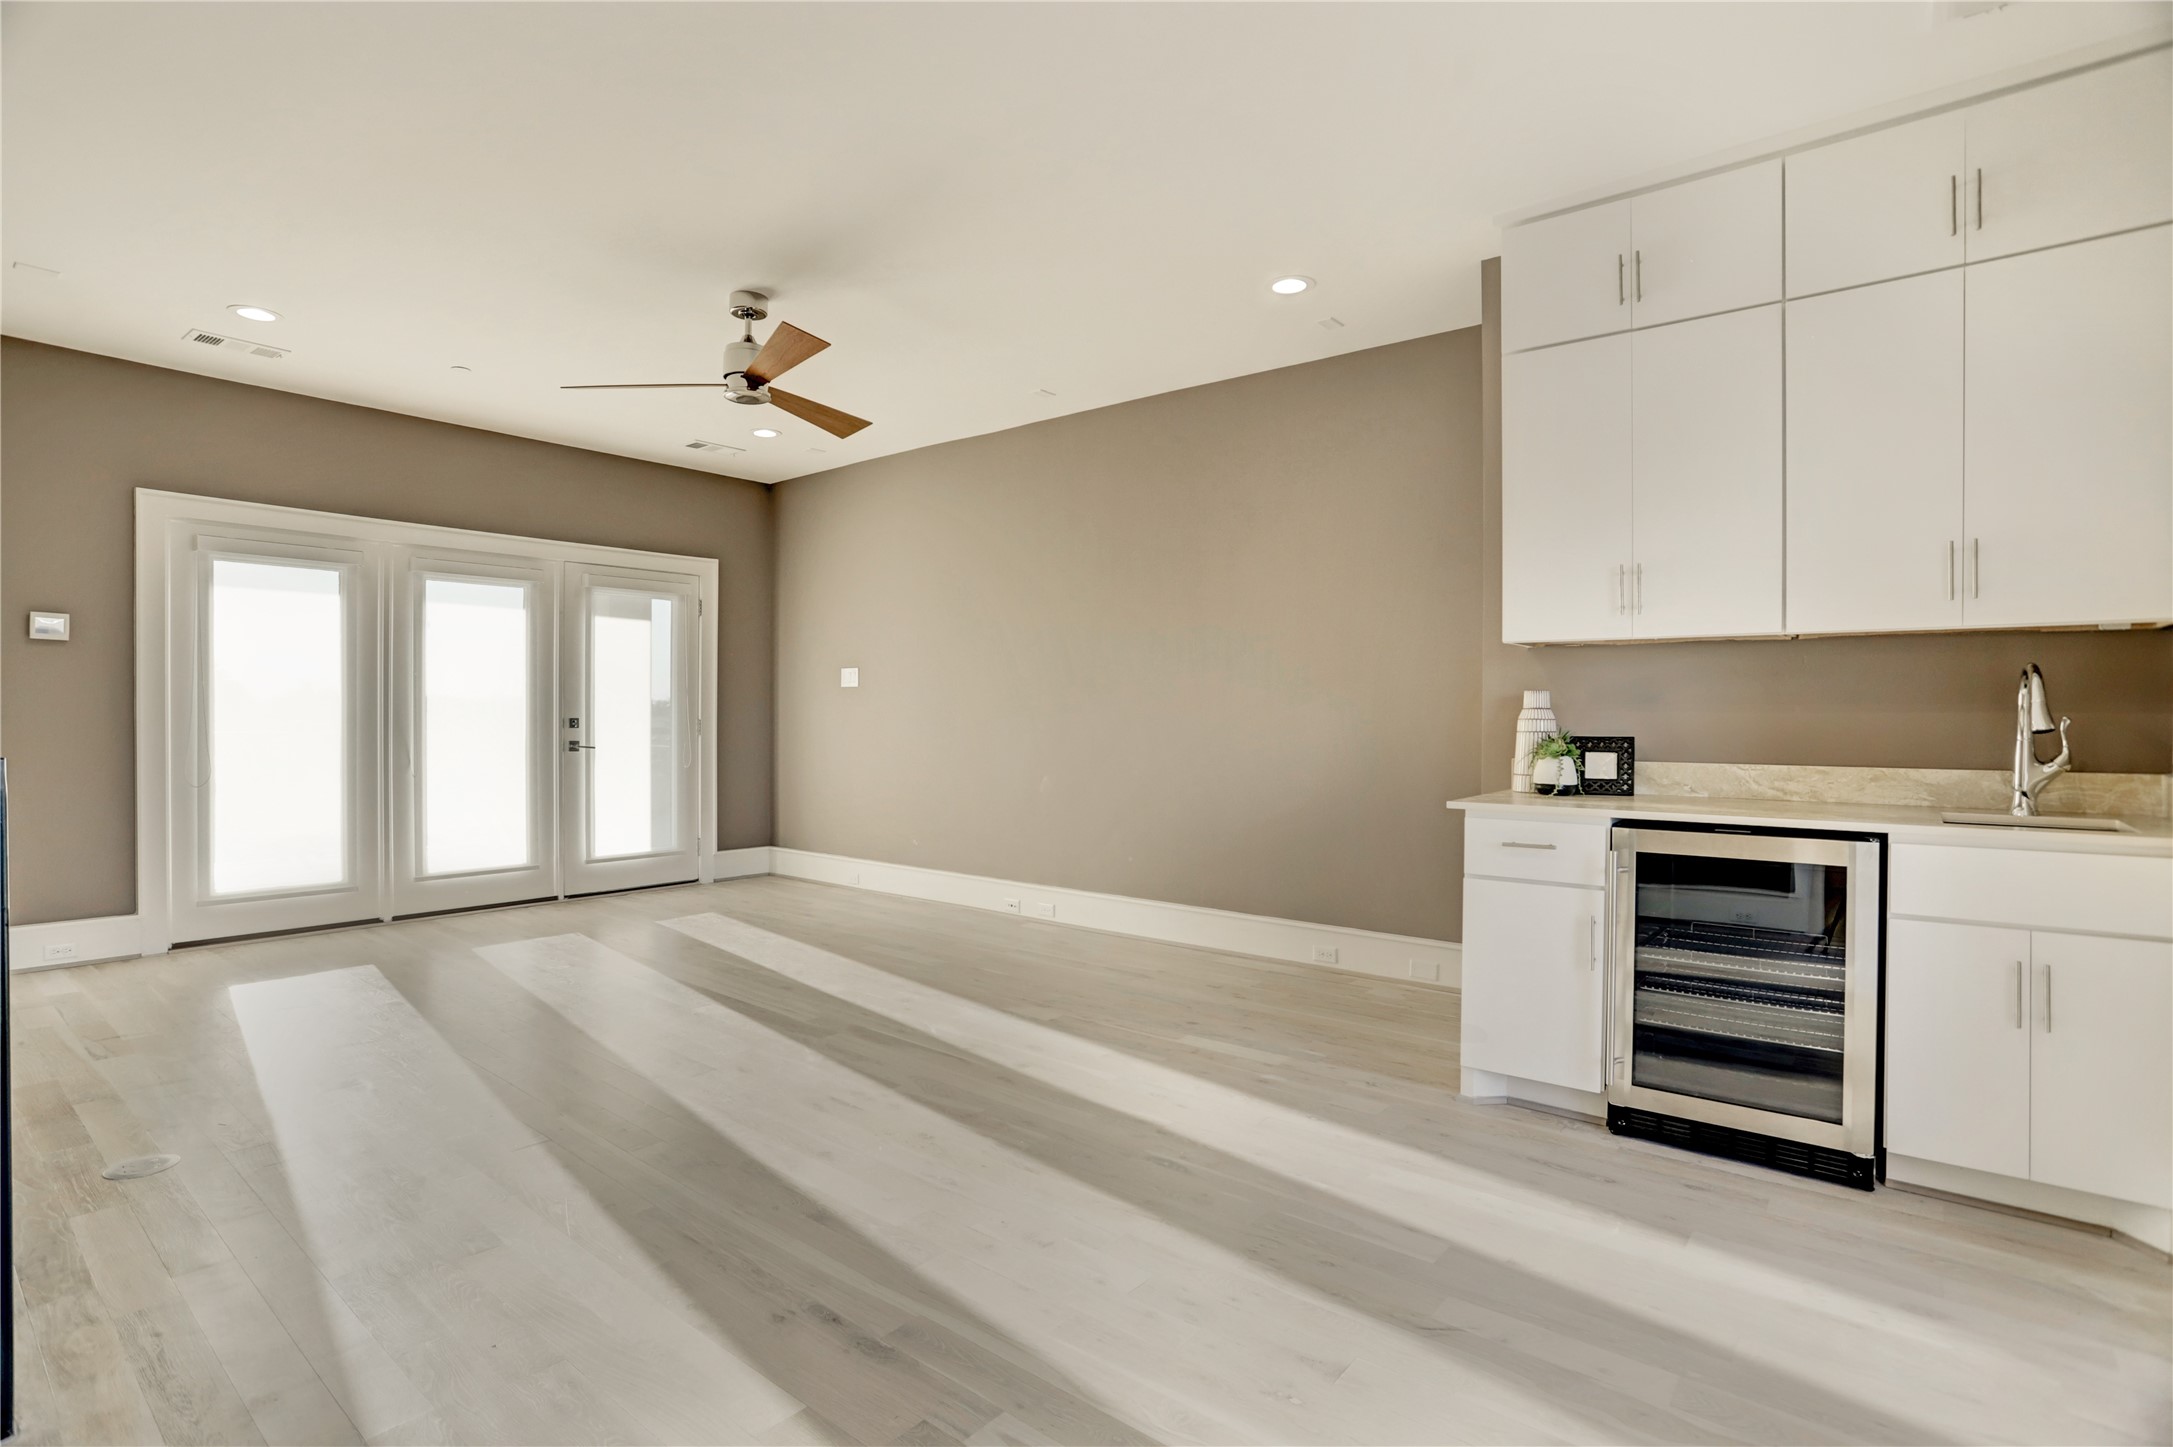 The forth floor offers an expansive flex/game room space and includes a gorgeous wet bar.